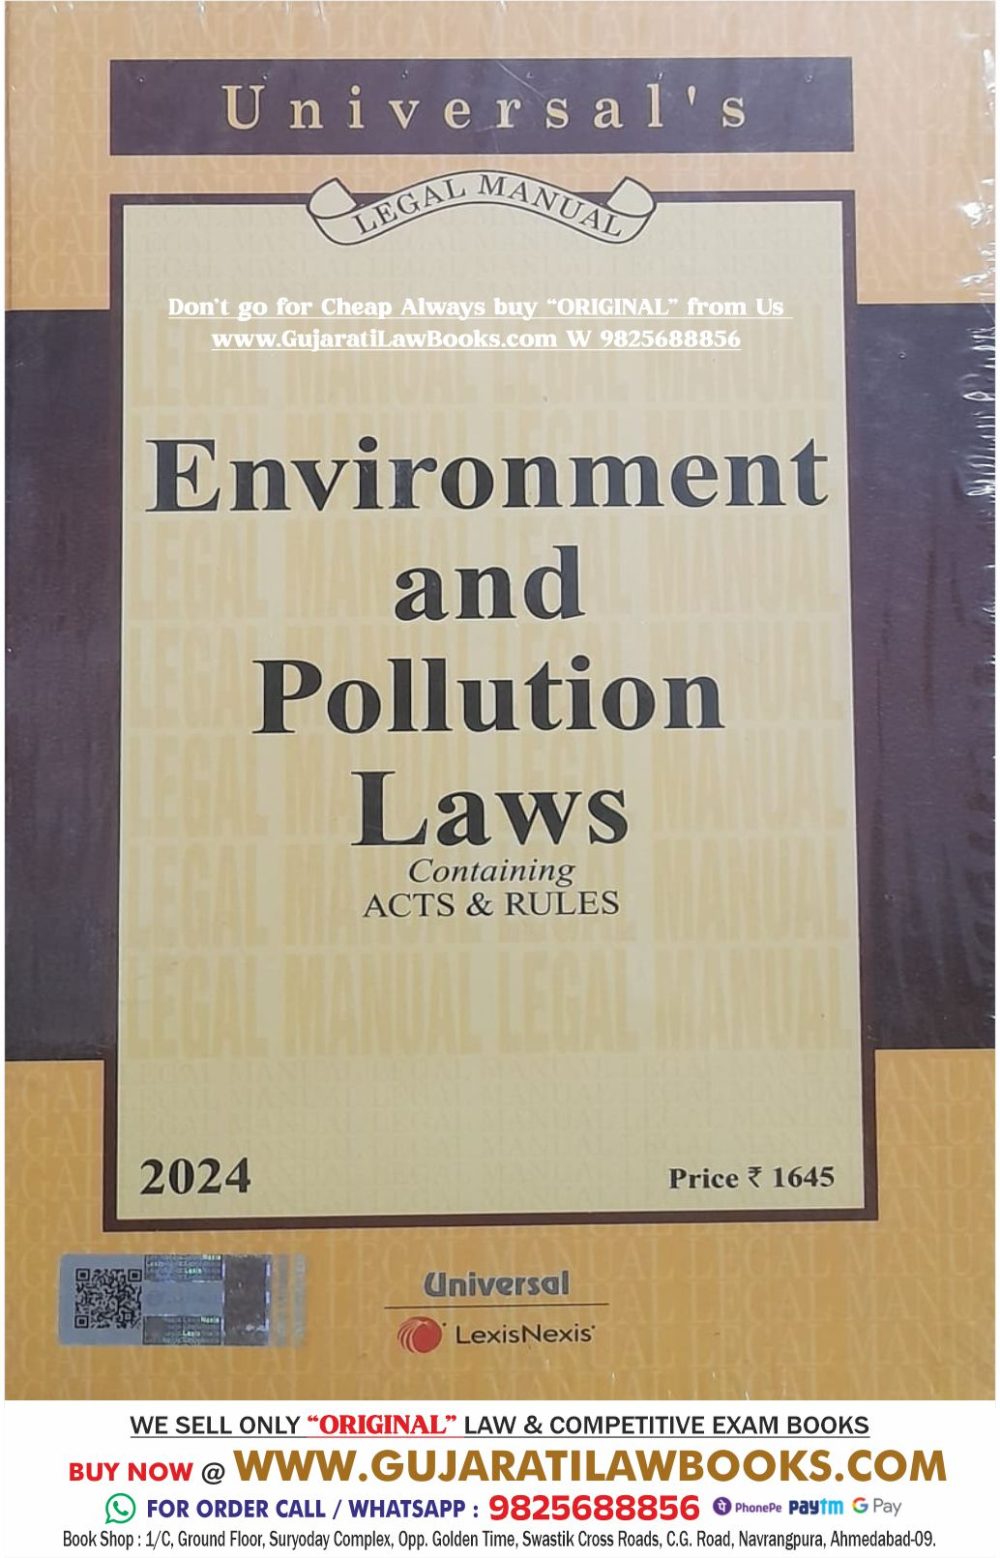 Environment and Pollution Laws - Latest 2024 Edition Universal LexisNexis